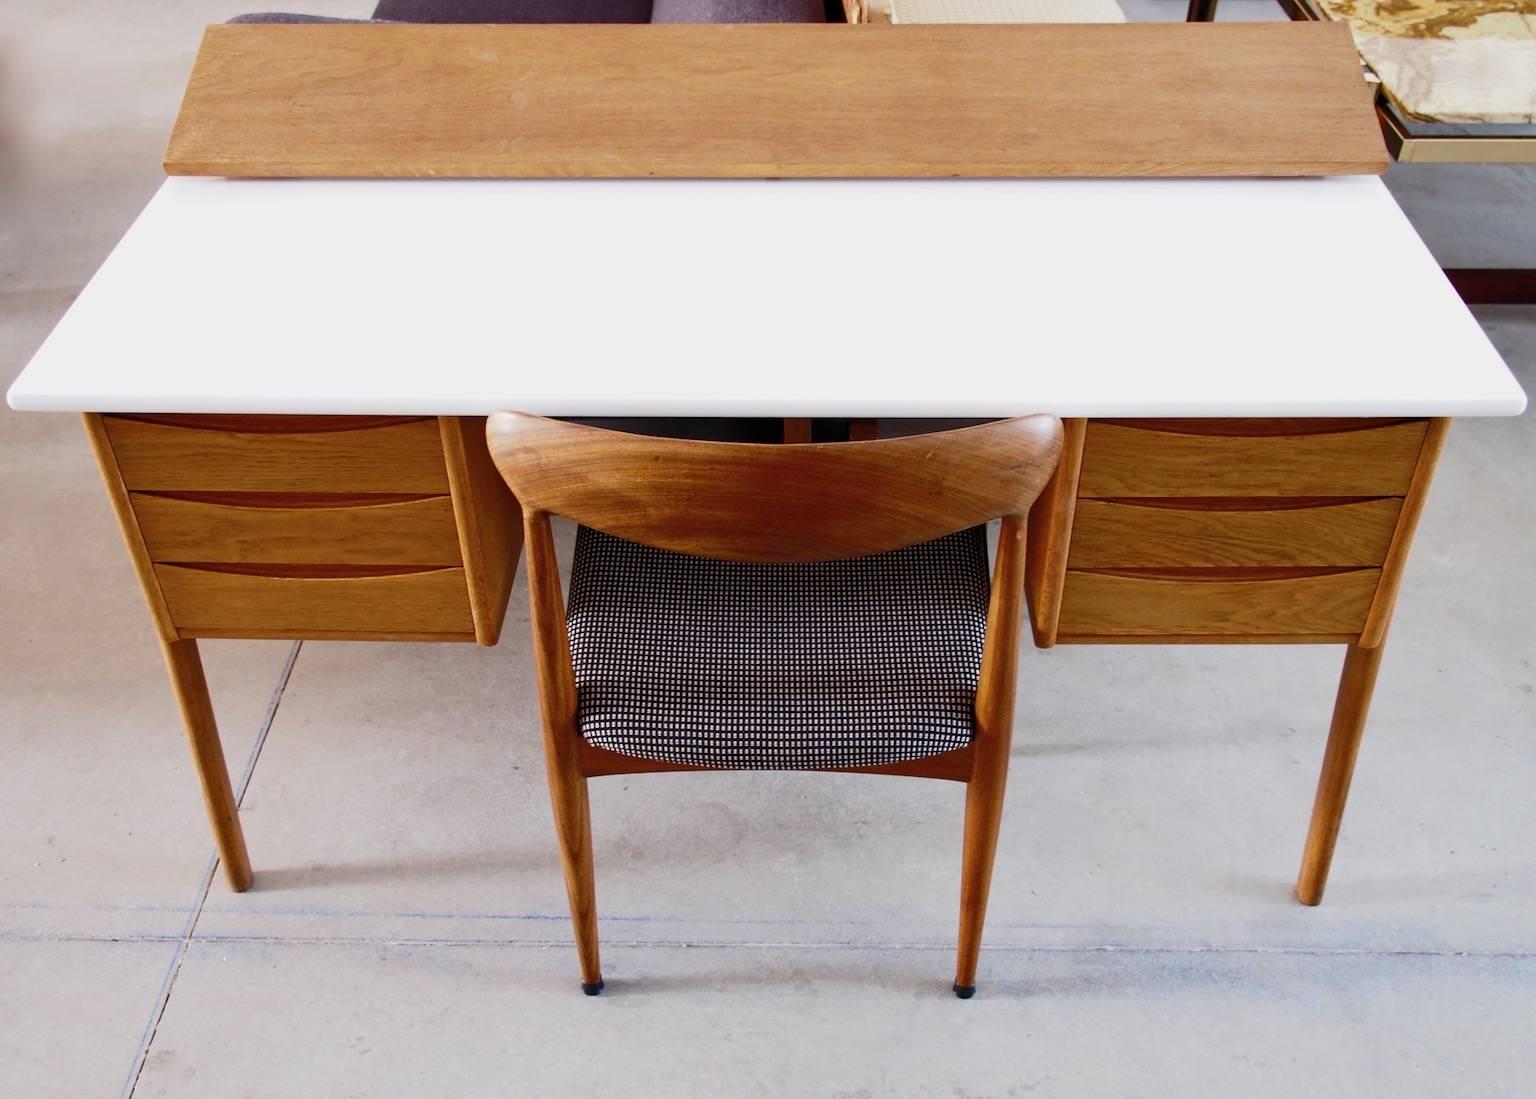 Mid-20th Century Modern Oak Writing Desk with White Tabletop 1